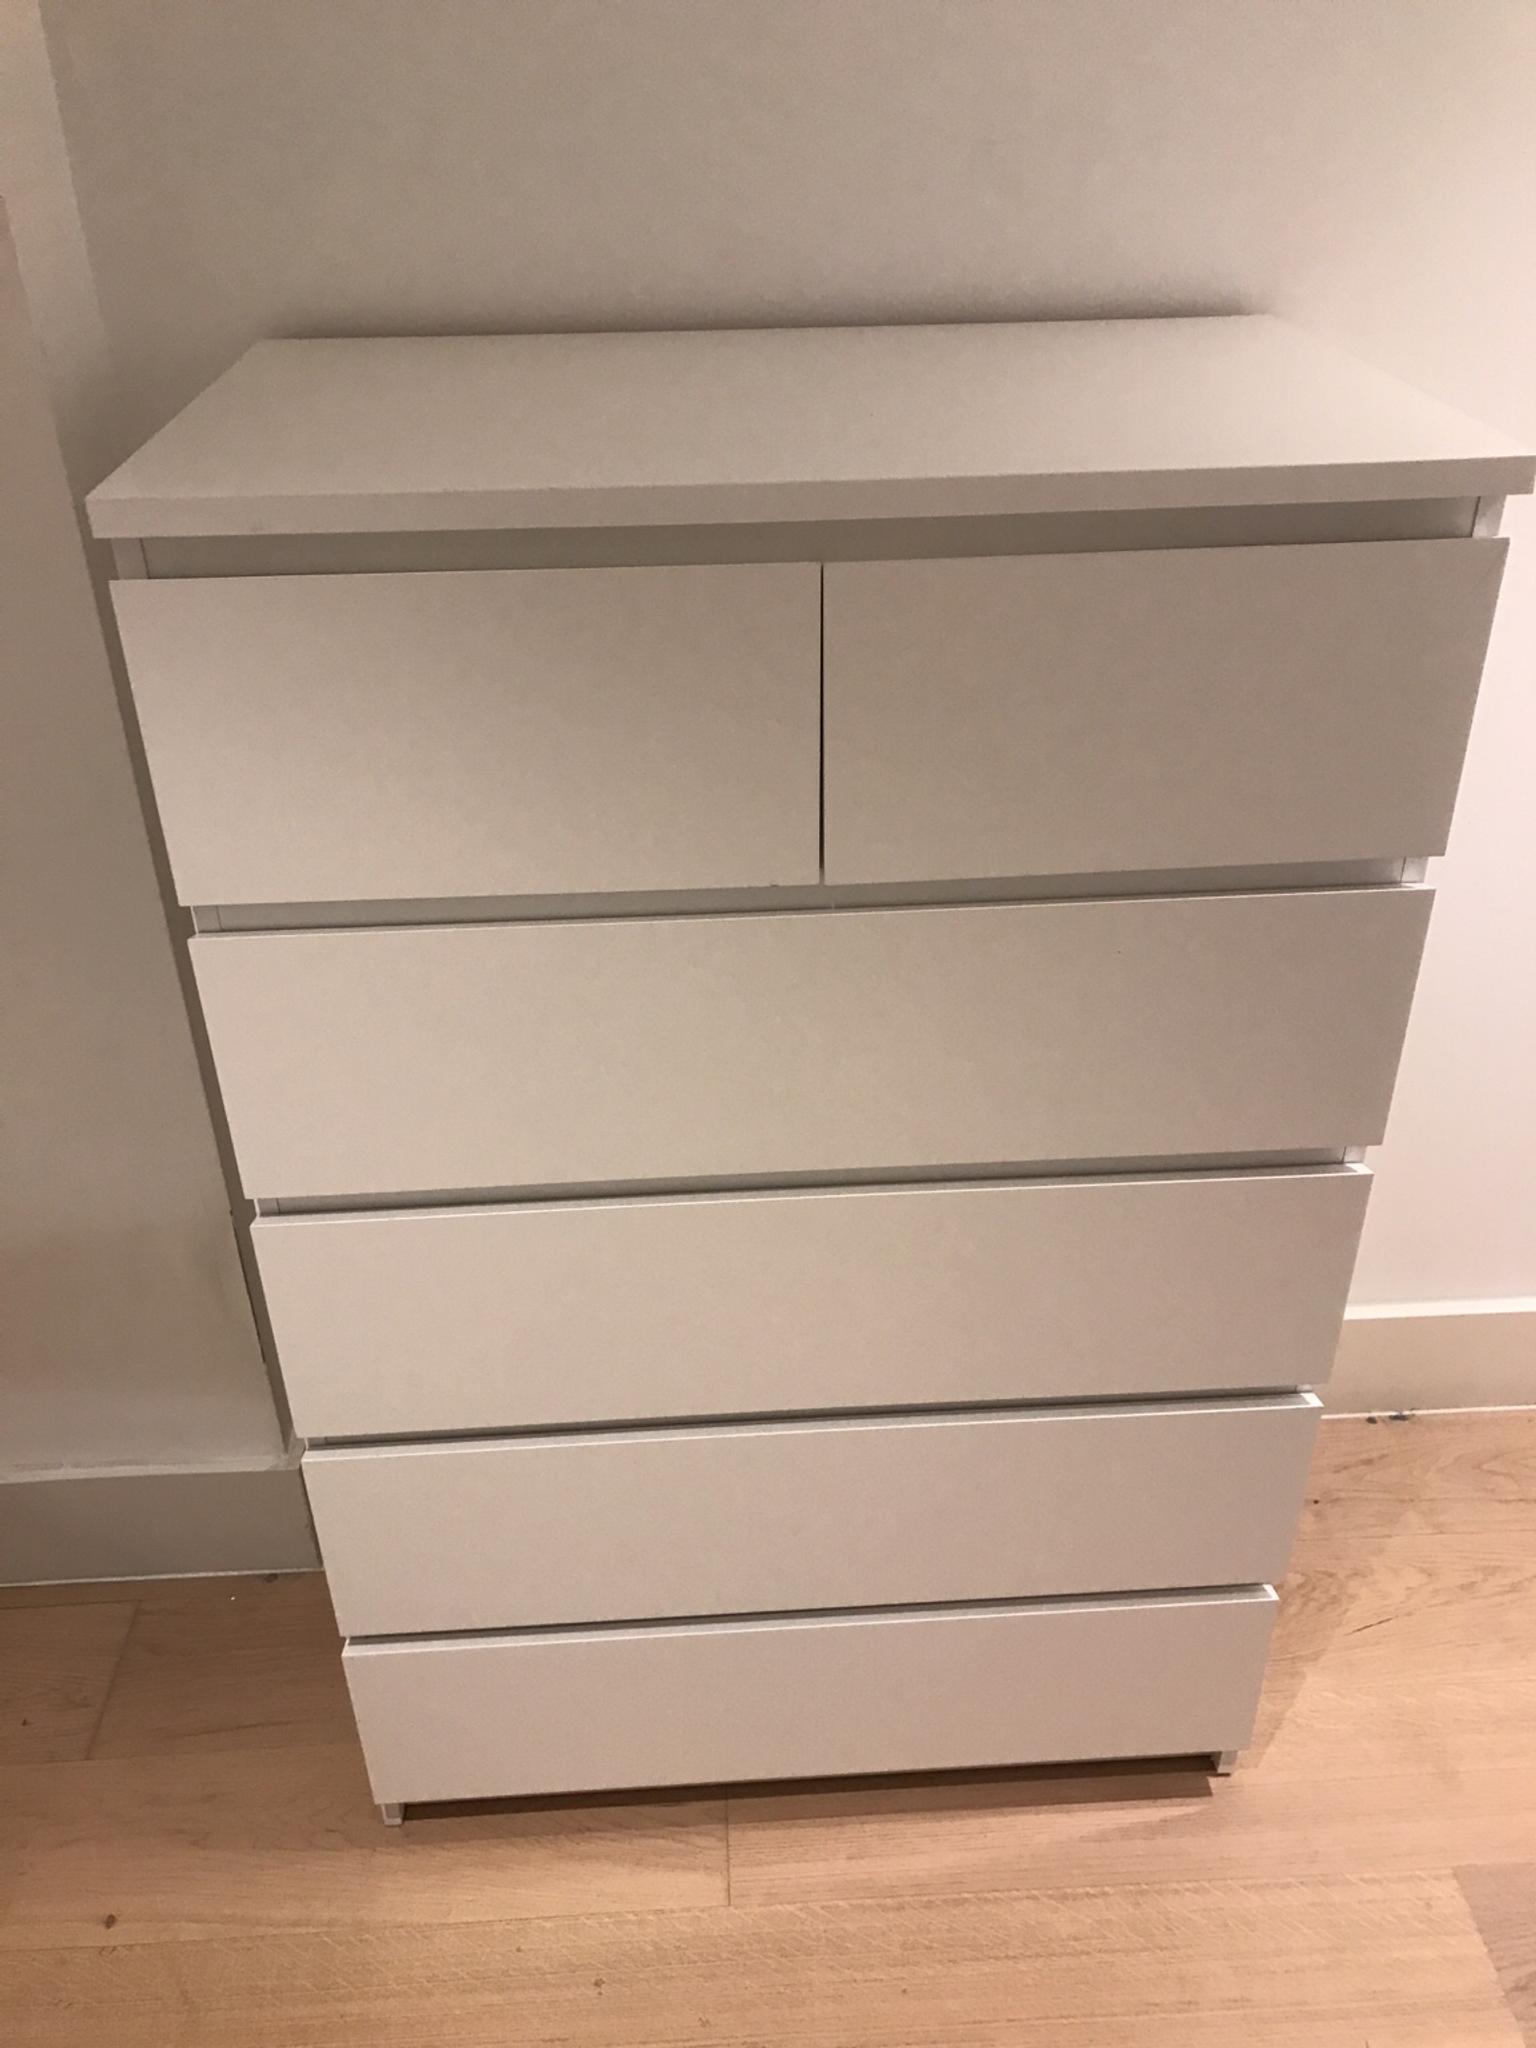 Ikea Malm 6 Drawer Dresser In W1f Westminster For 60 00 For Sale